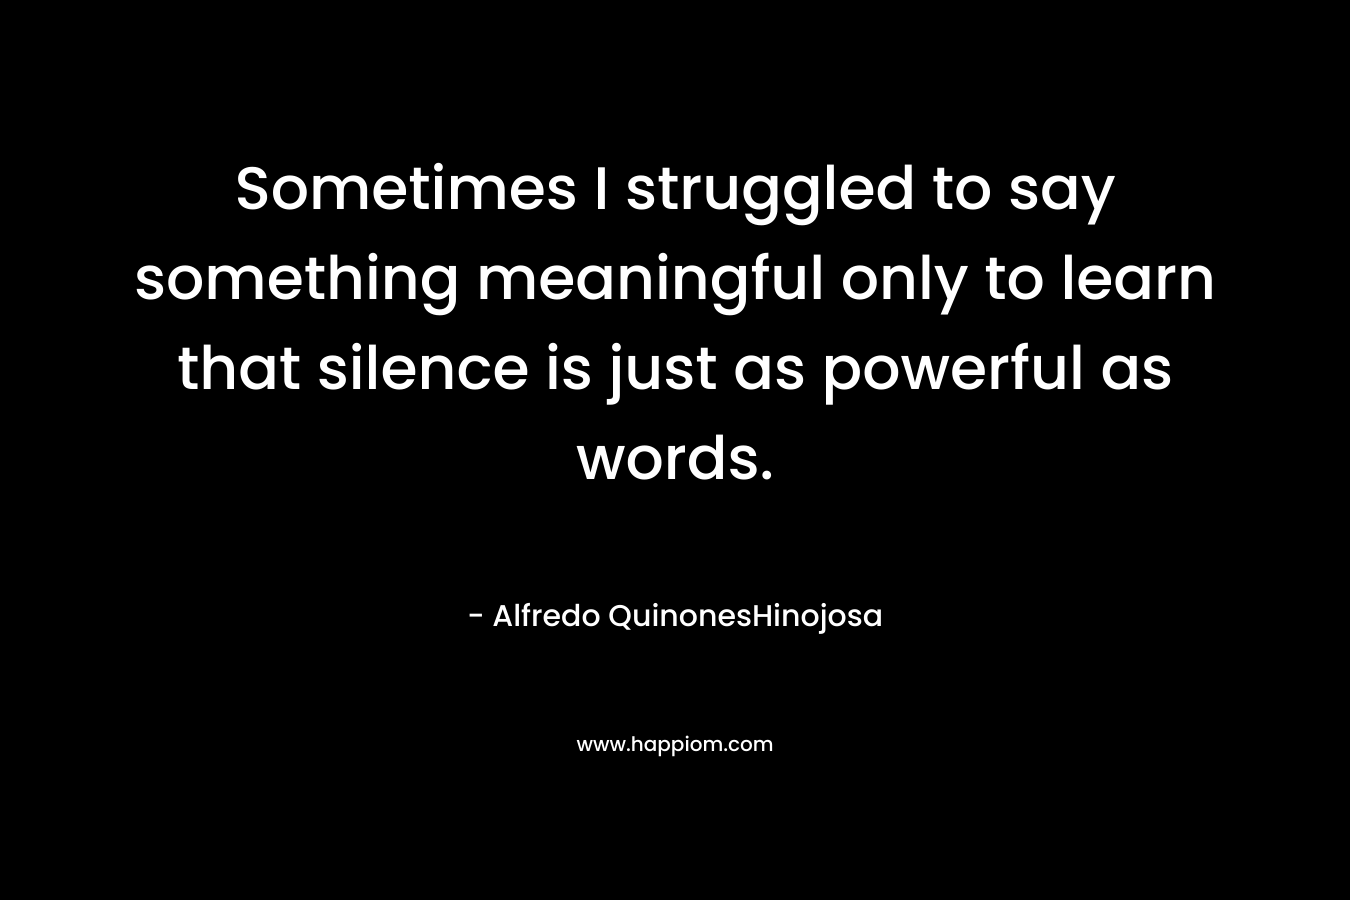 Sometimes I struggled to say something meaningful only to learn that silence is just as powerful as words. – Alfredo QuinonesHinojosa